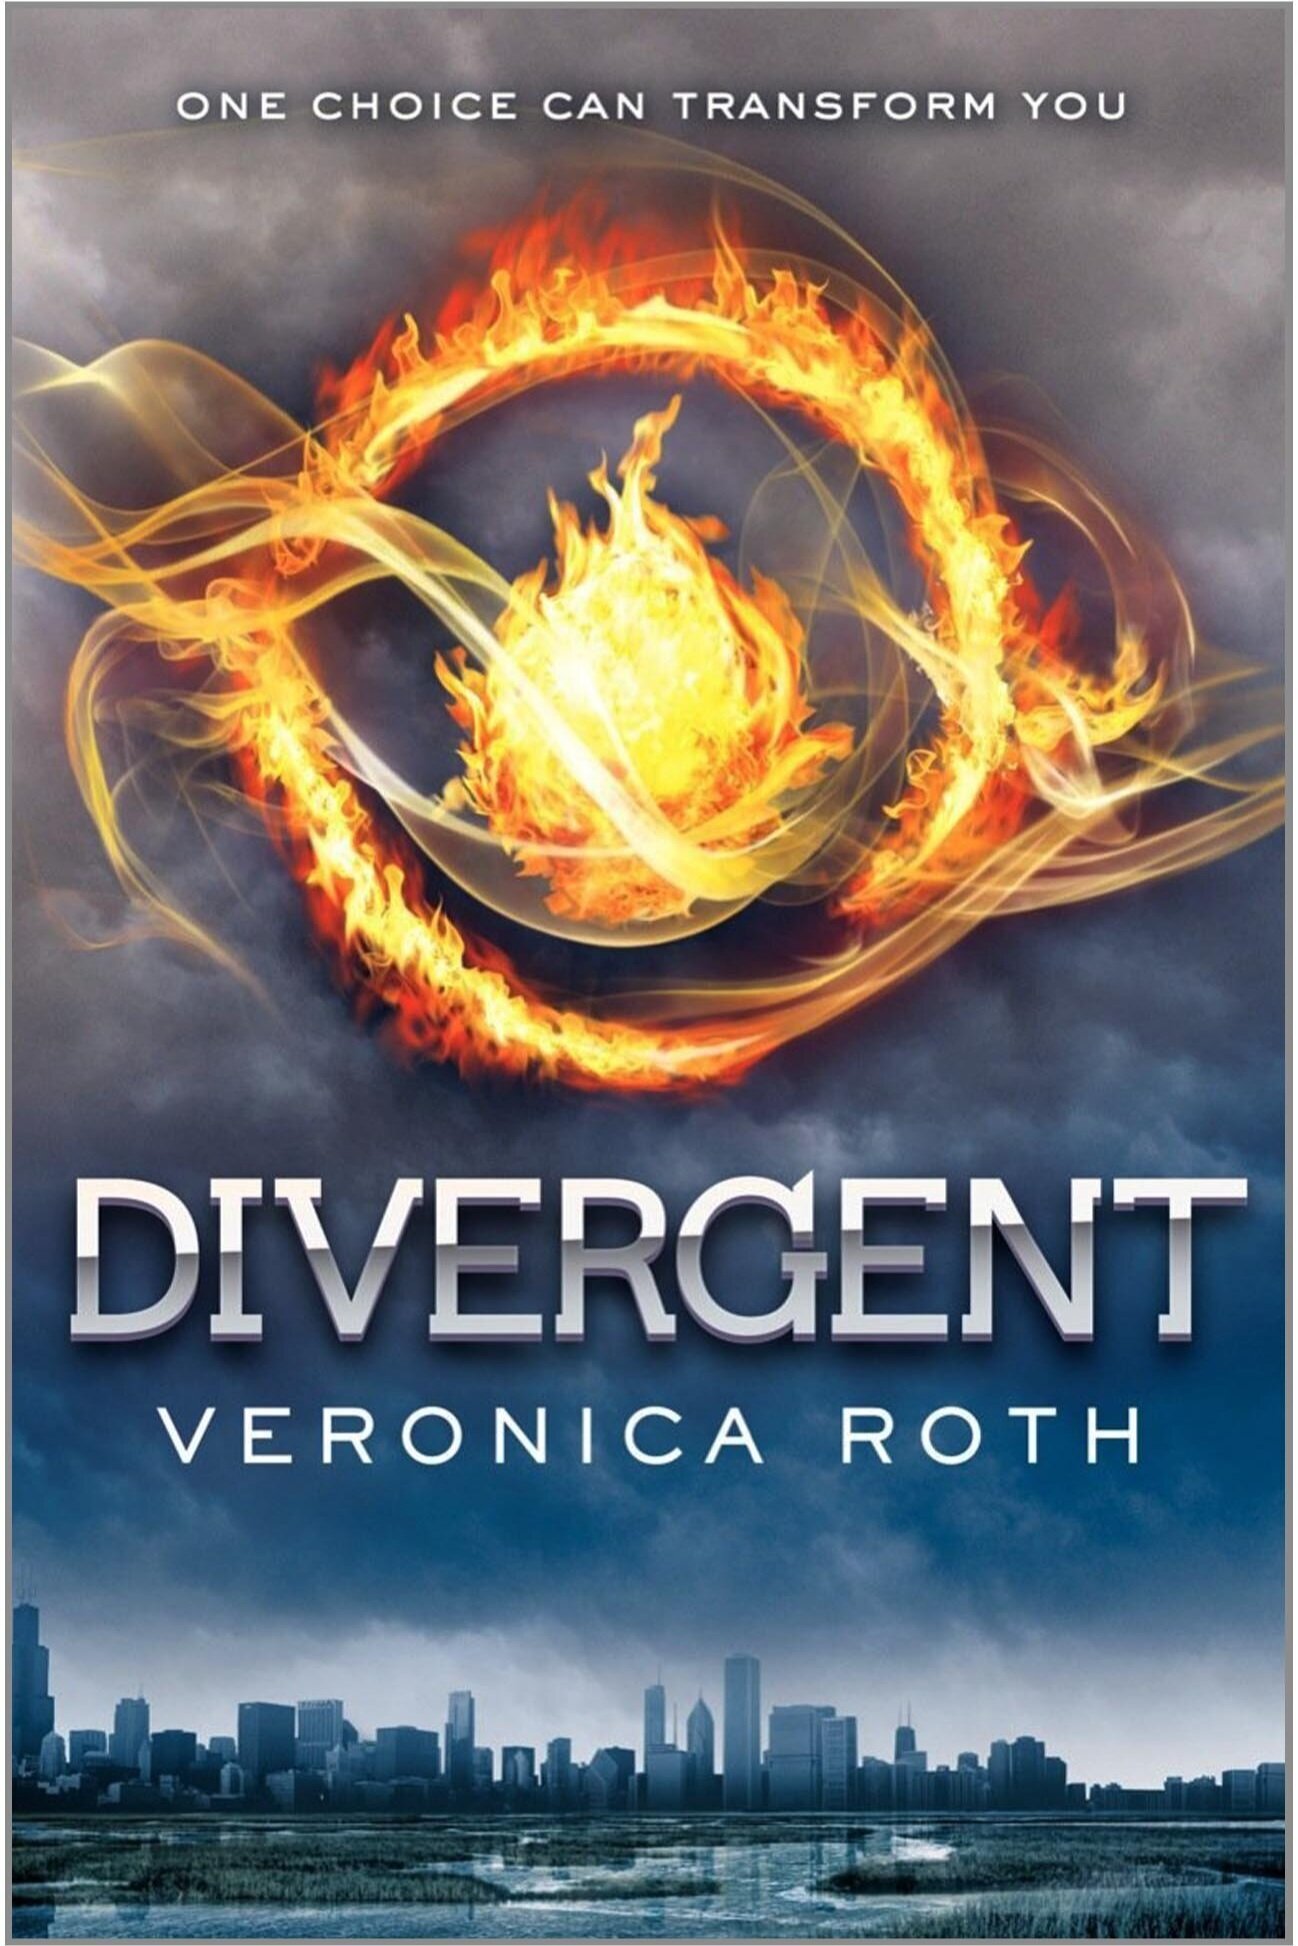 Divergent, by Veronica Roth